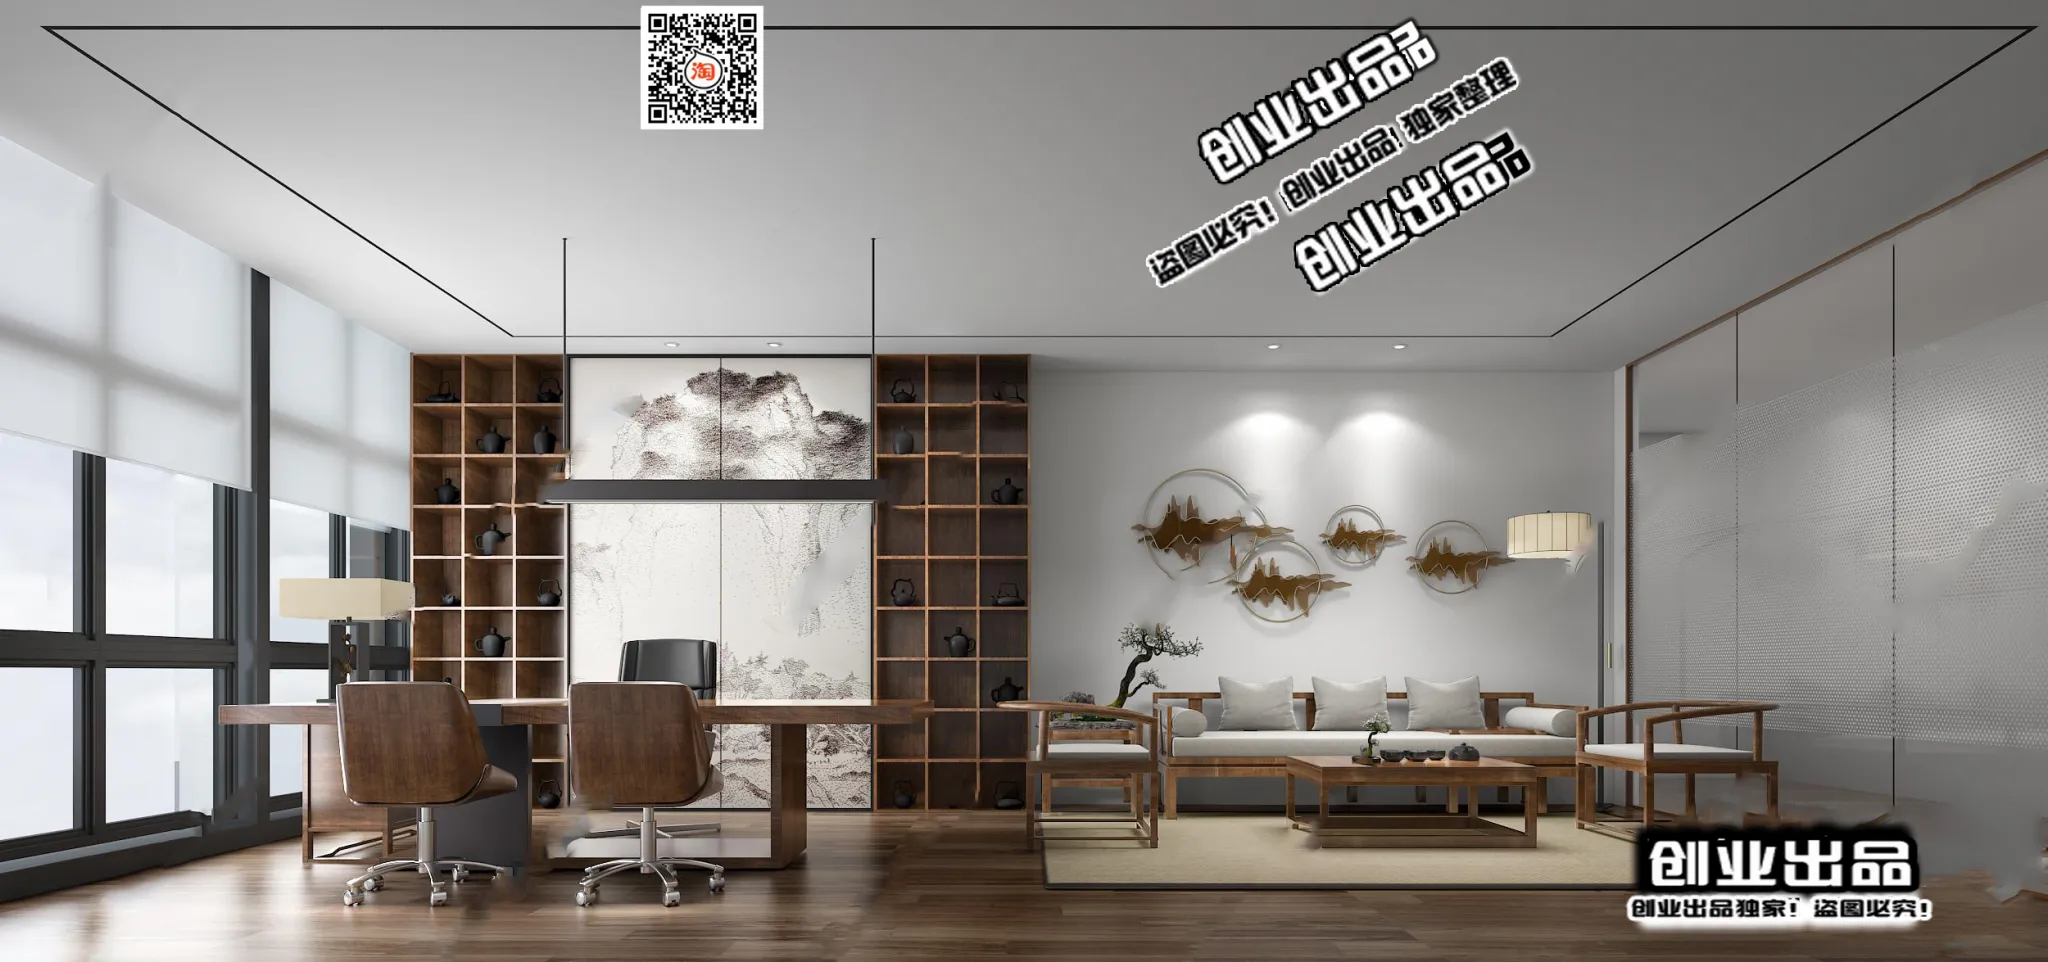 3D OFFICE INTERIOR (VRAY) – MANAGER ROOM 3D SCENES – 075